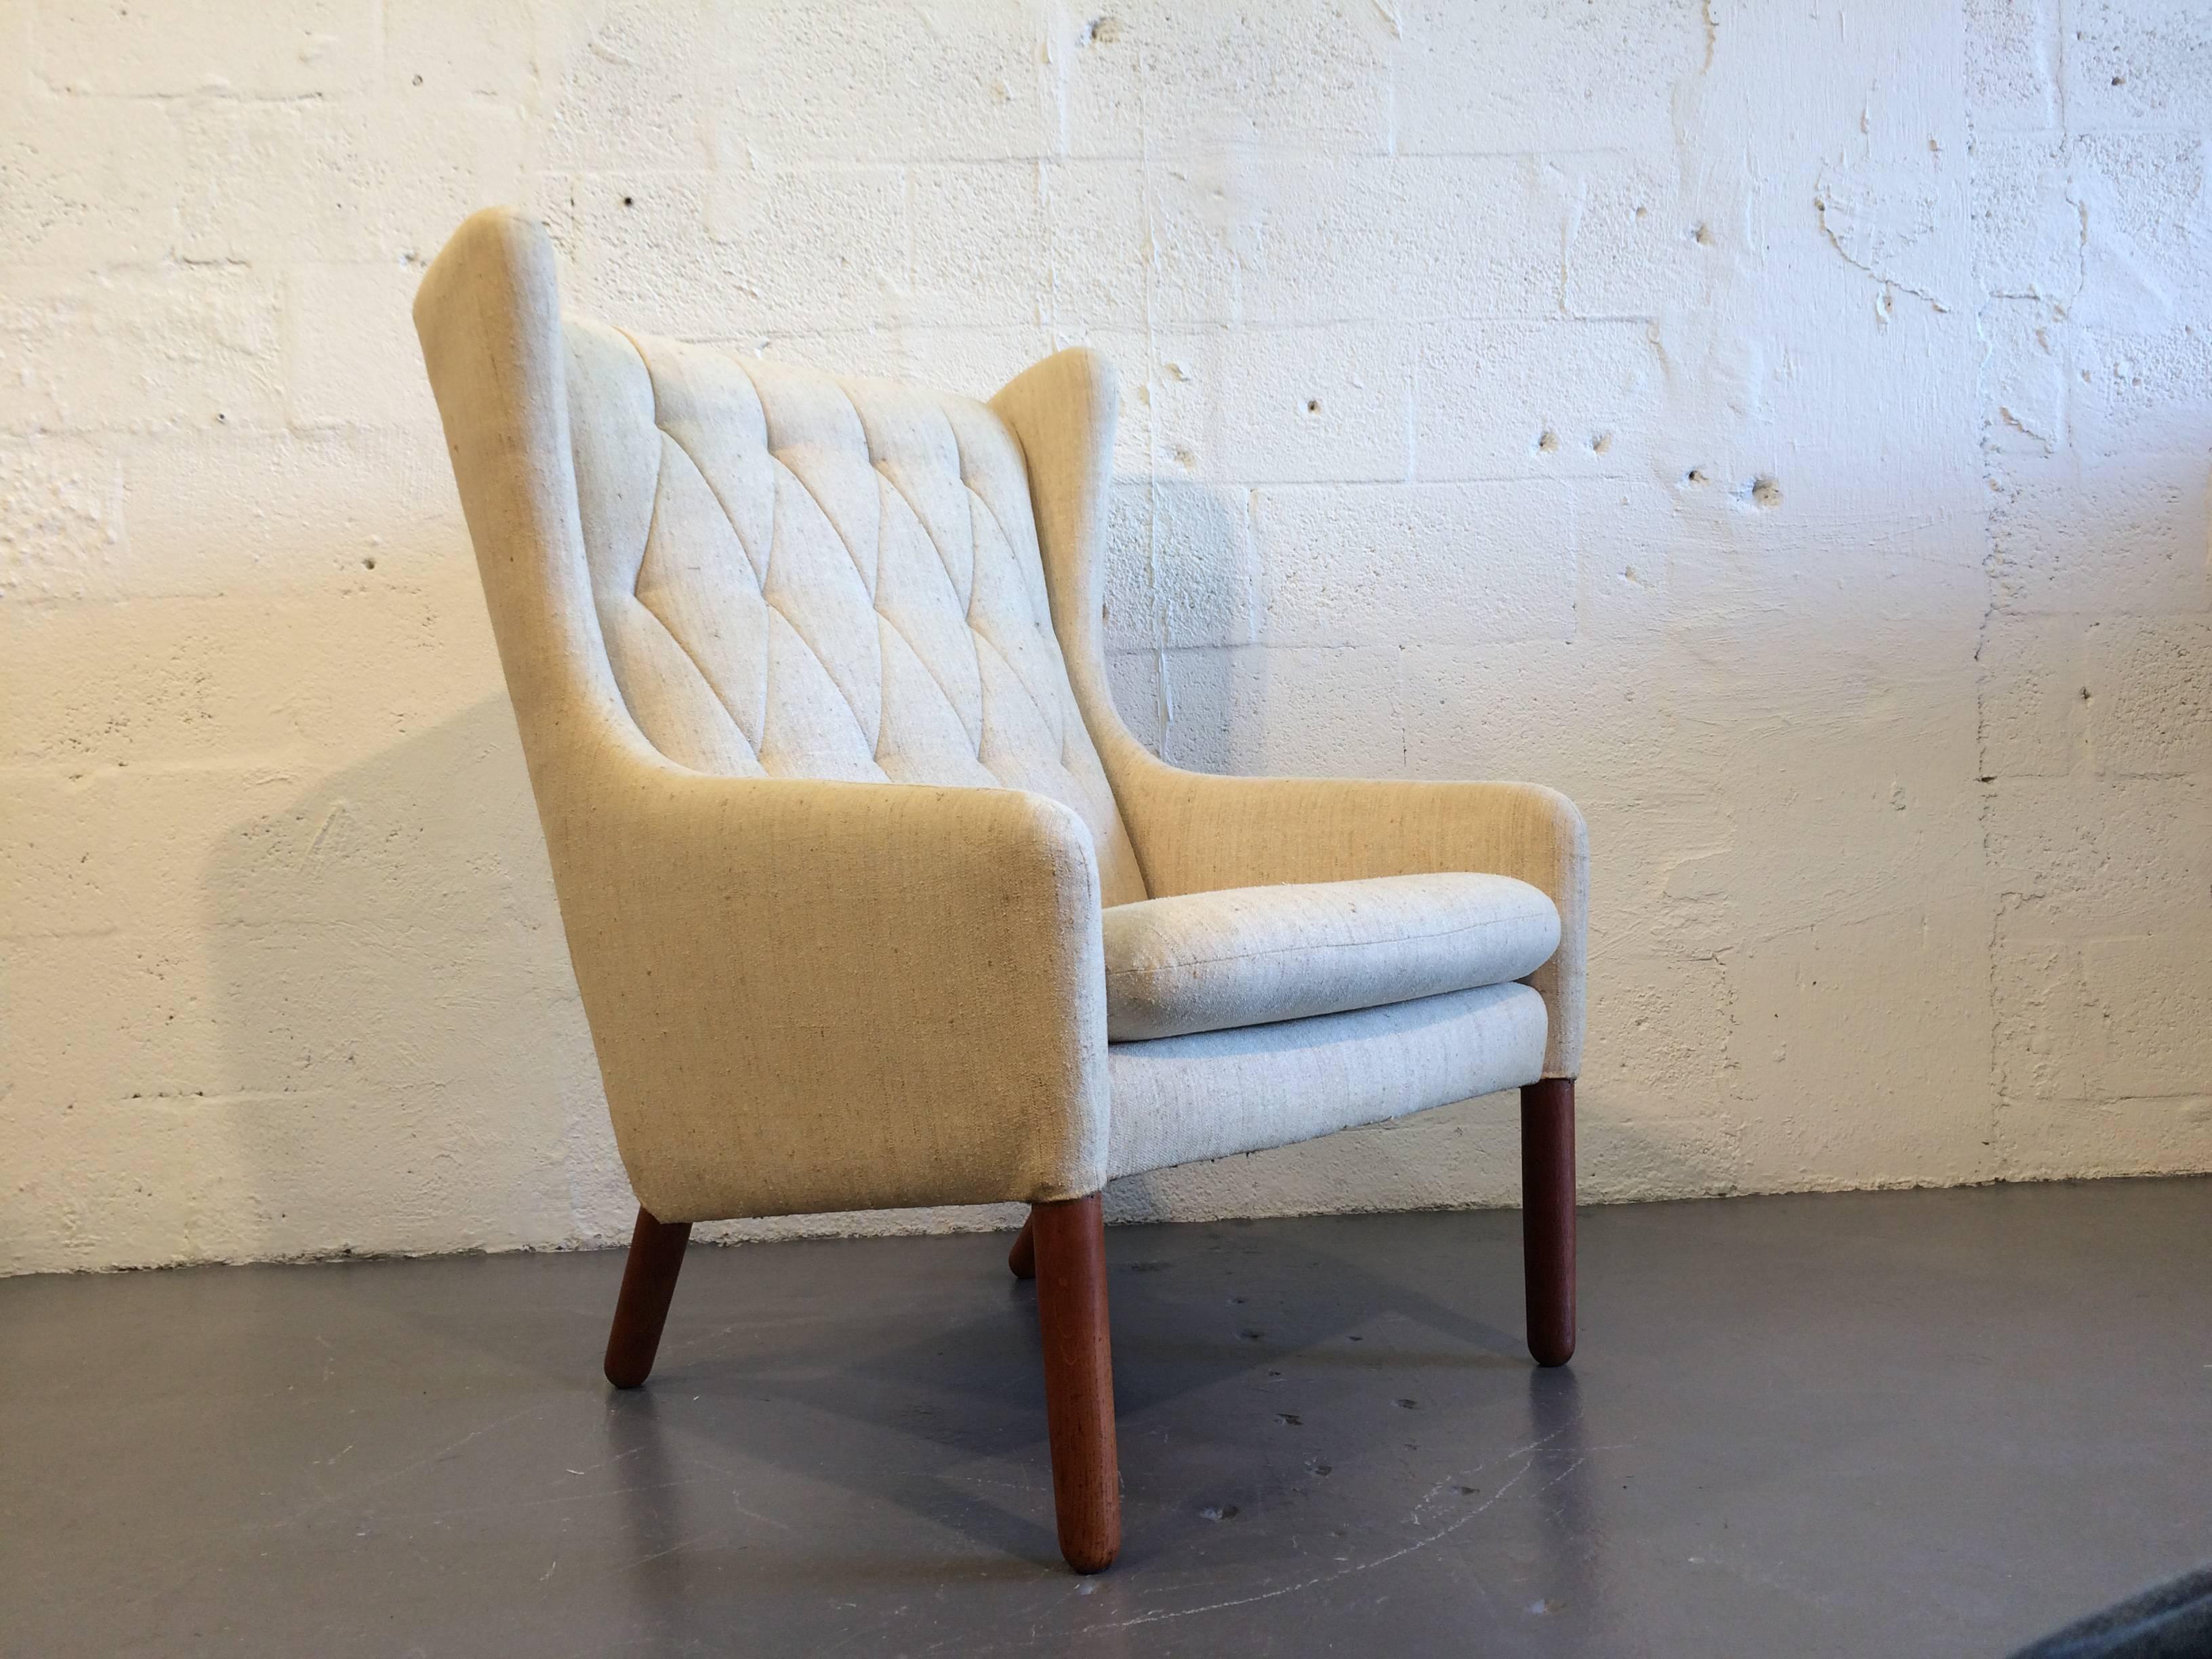 Great chair with handsome oak legs. Chair needs to be recovered. We can help if wanted.